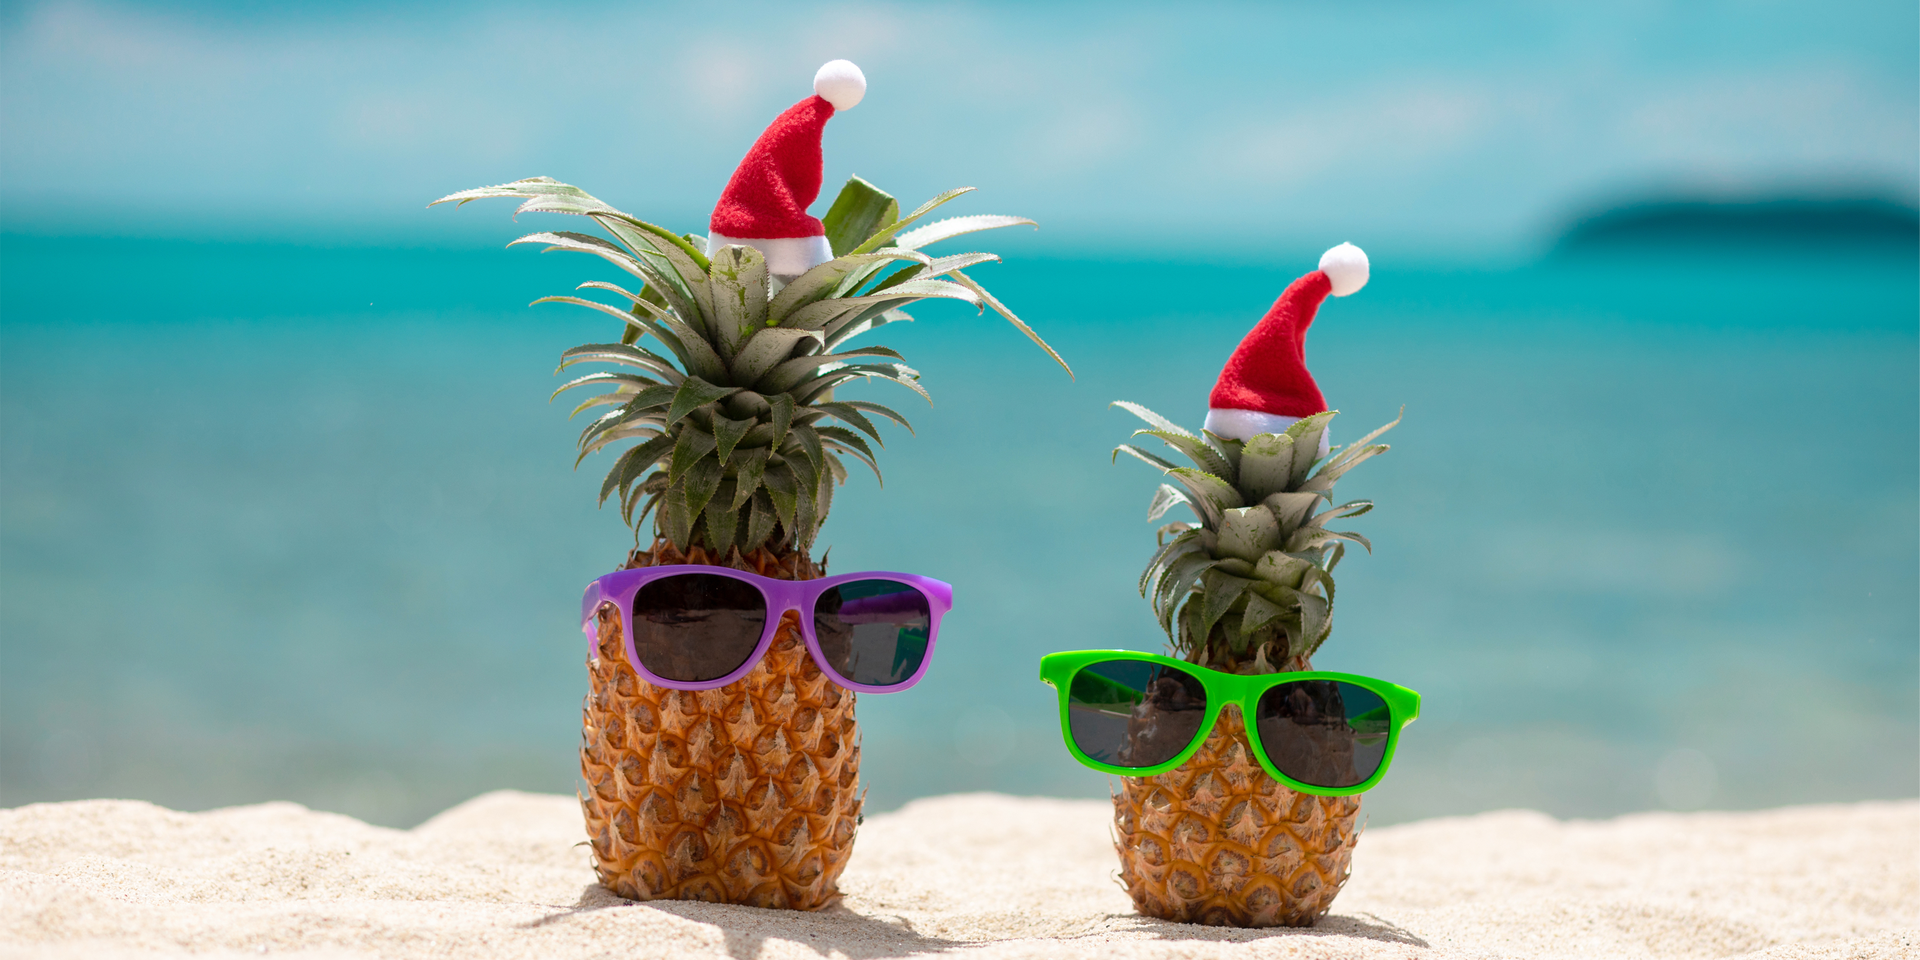 thumbnails From leis to leaks: Urology education with a festive Hawaiian Christmas atmosphere